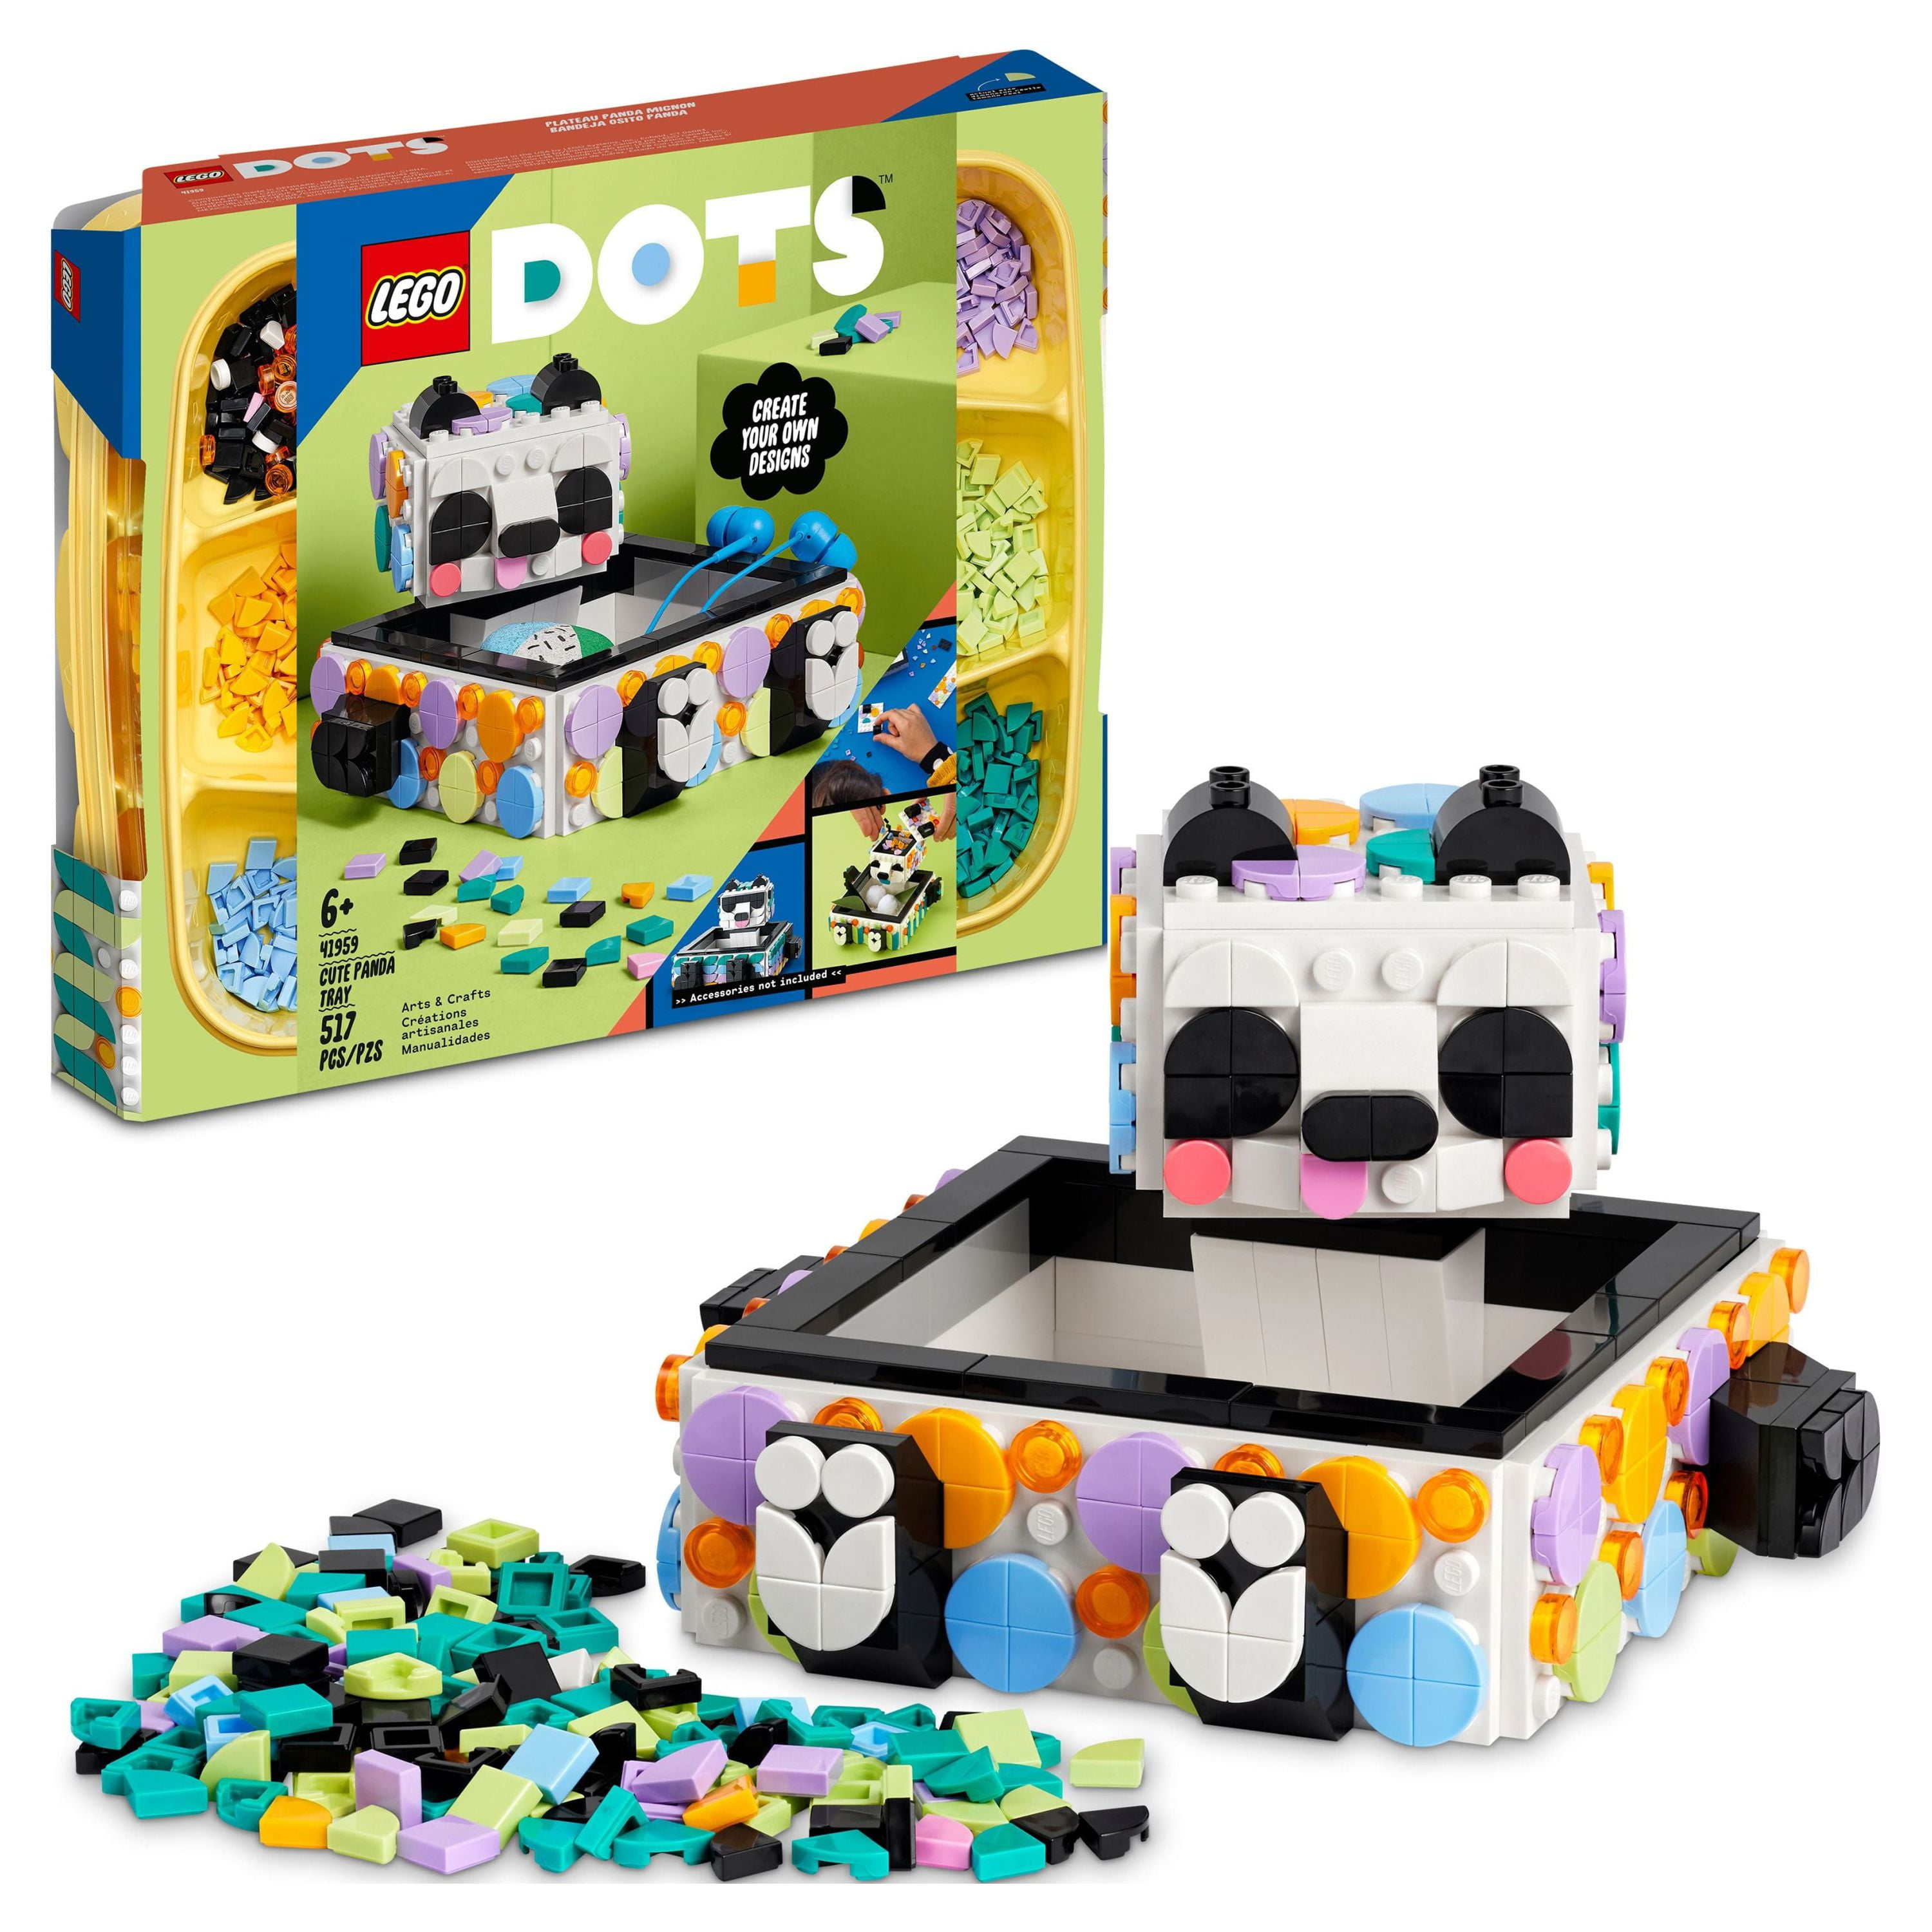 LEGO DOTS Extra DOTS Series 8 – Glitter and Shine Set 41803